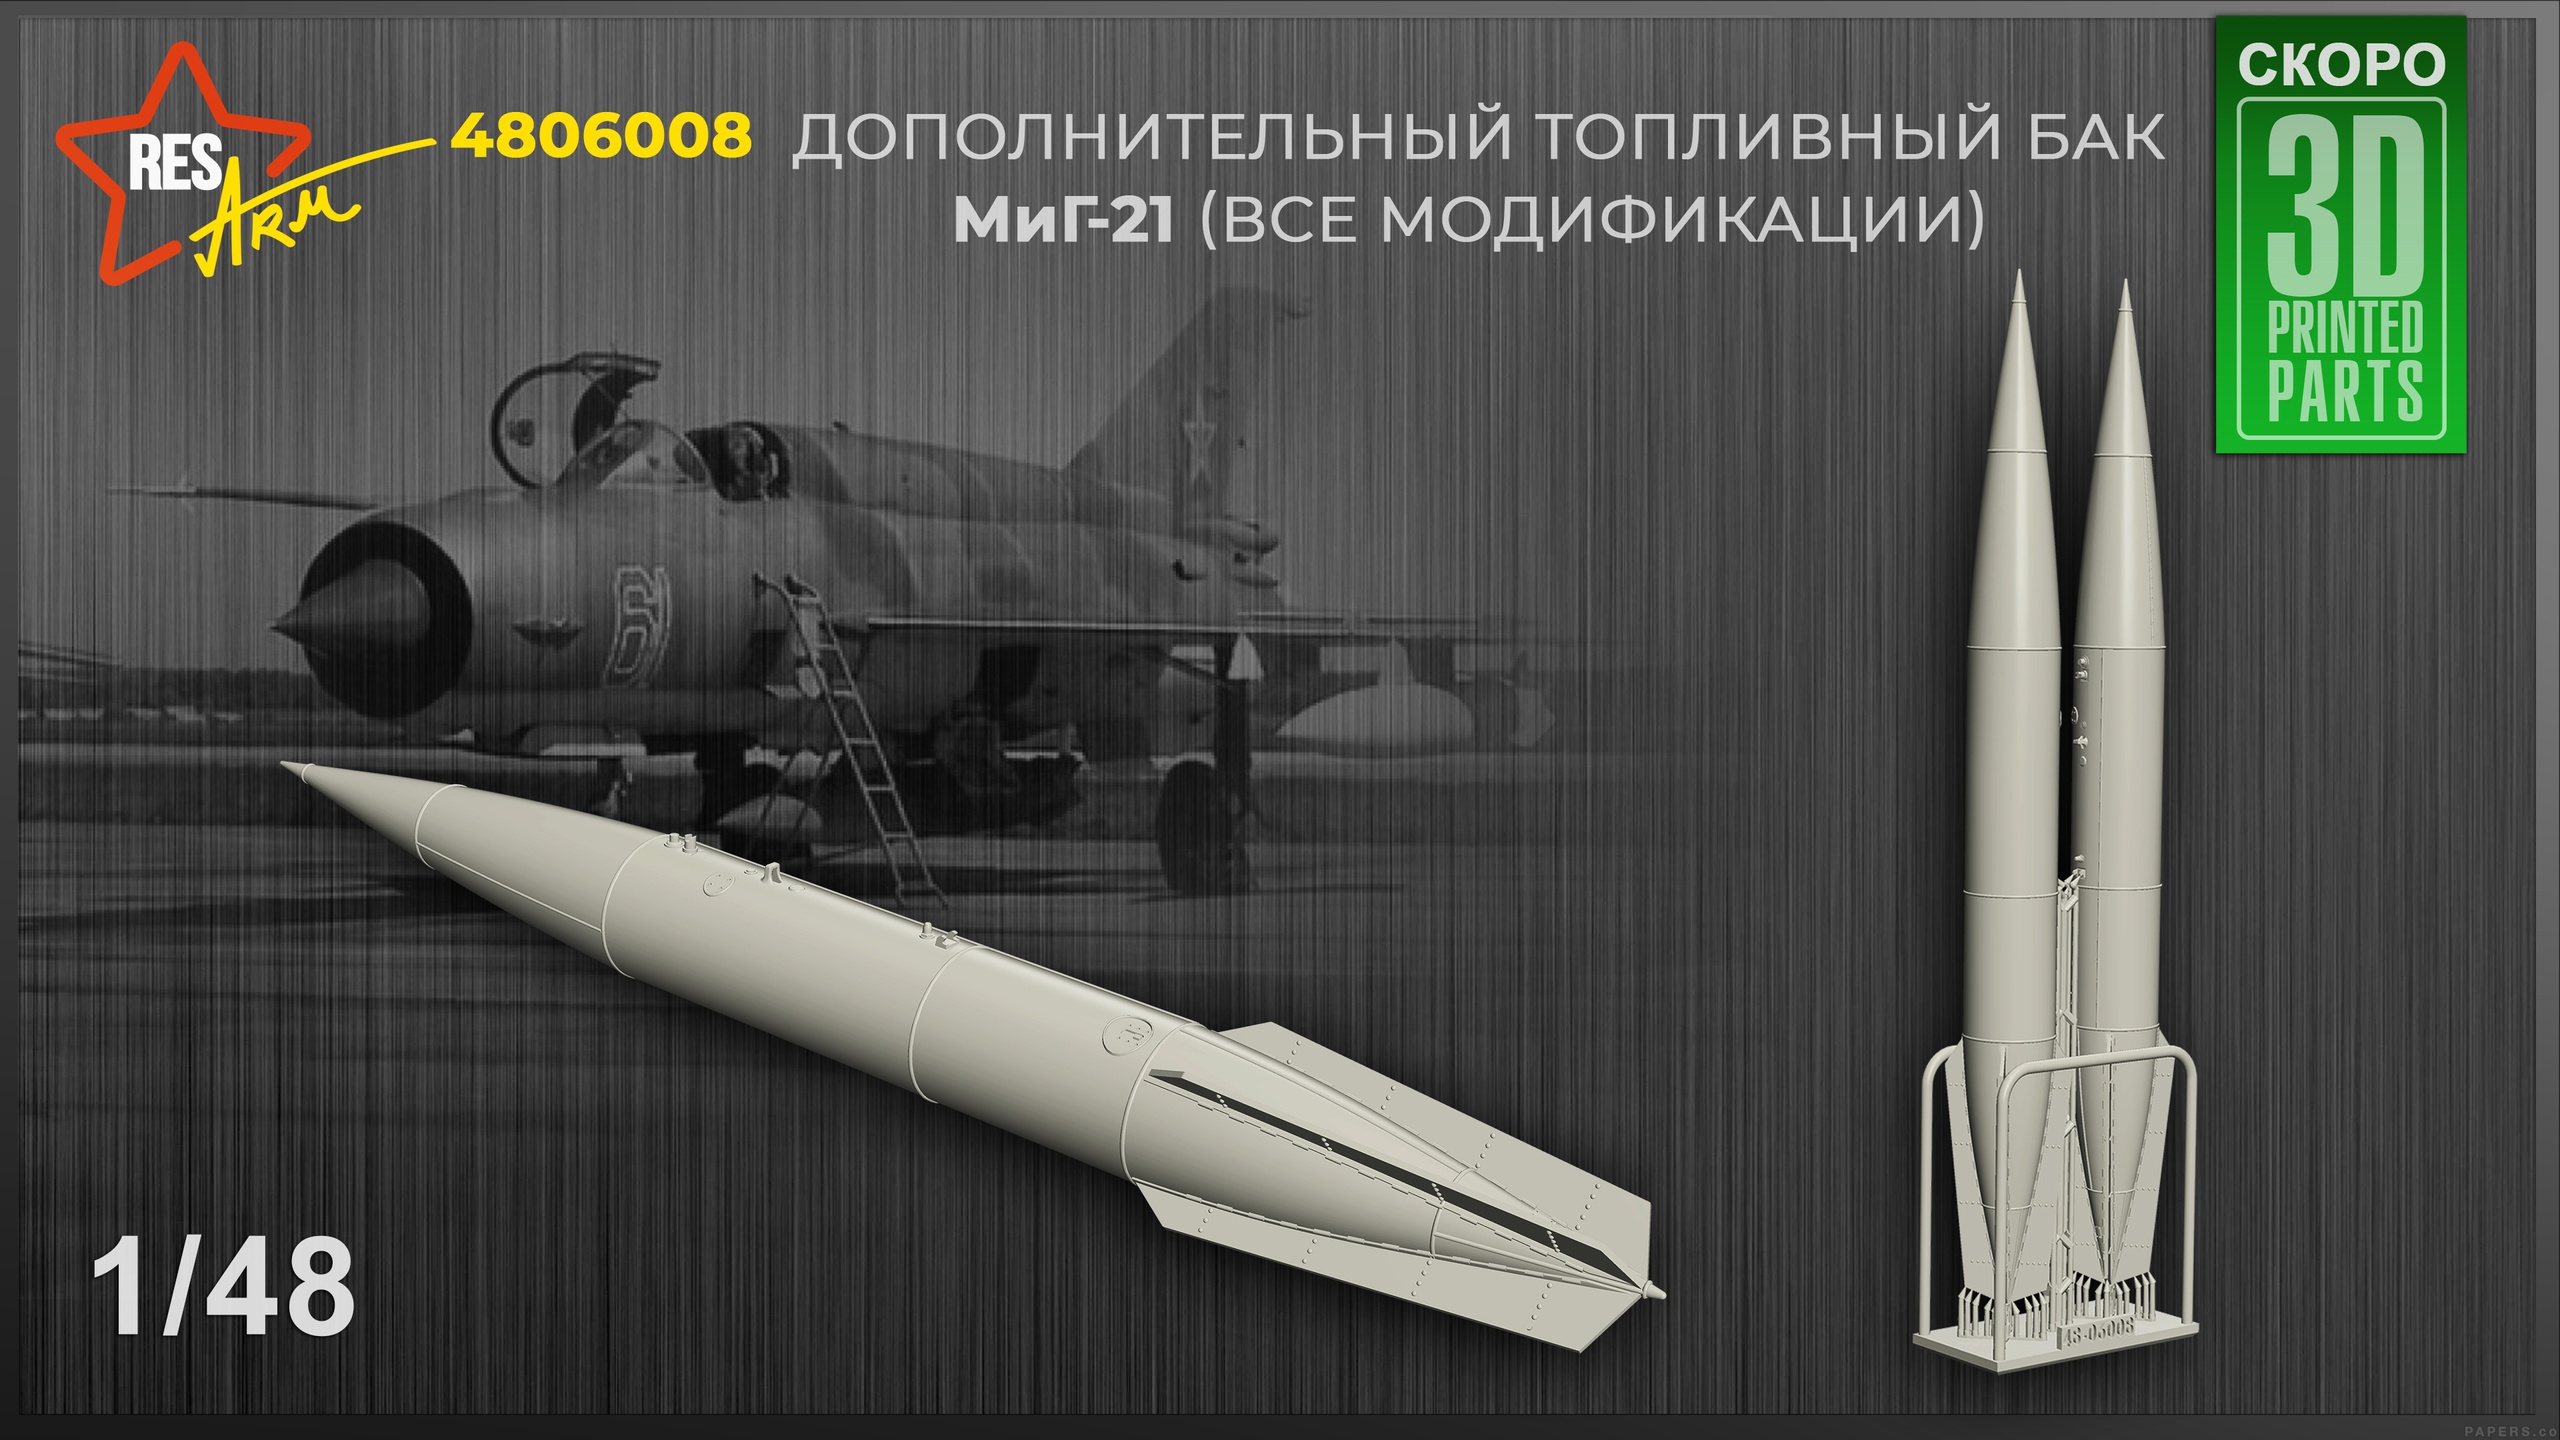 Additions (3D resin printing) 1/48 Additional fuel tanks of MiG-21 (all modifications) (RESArm)